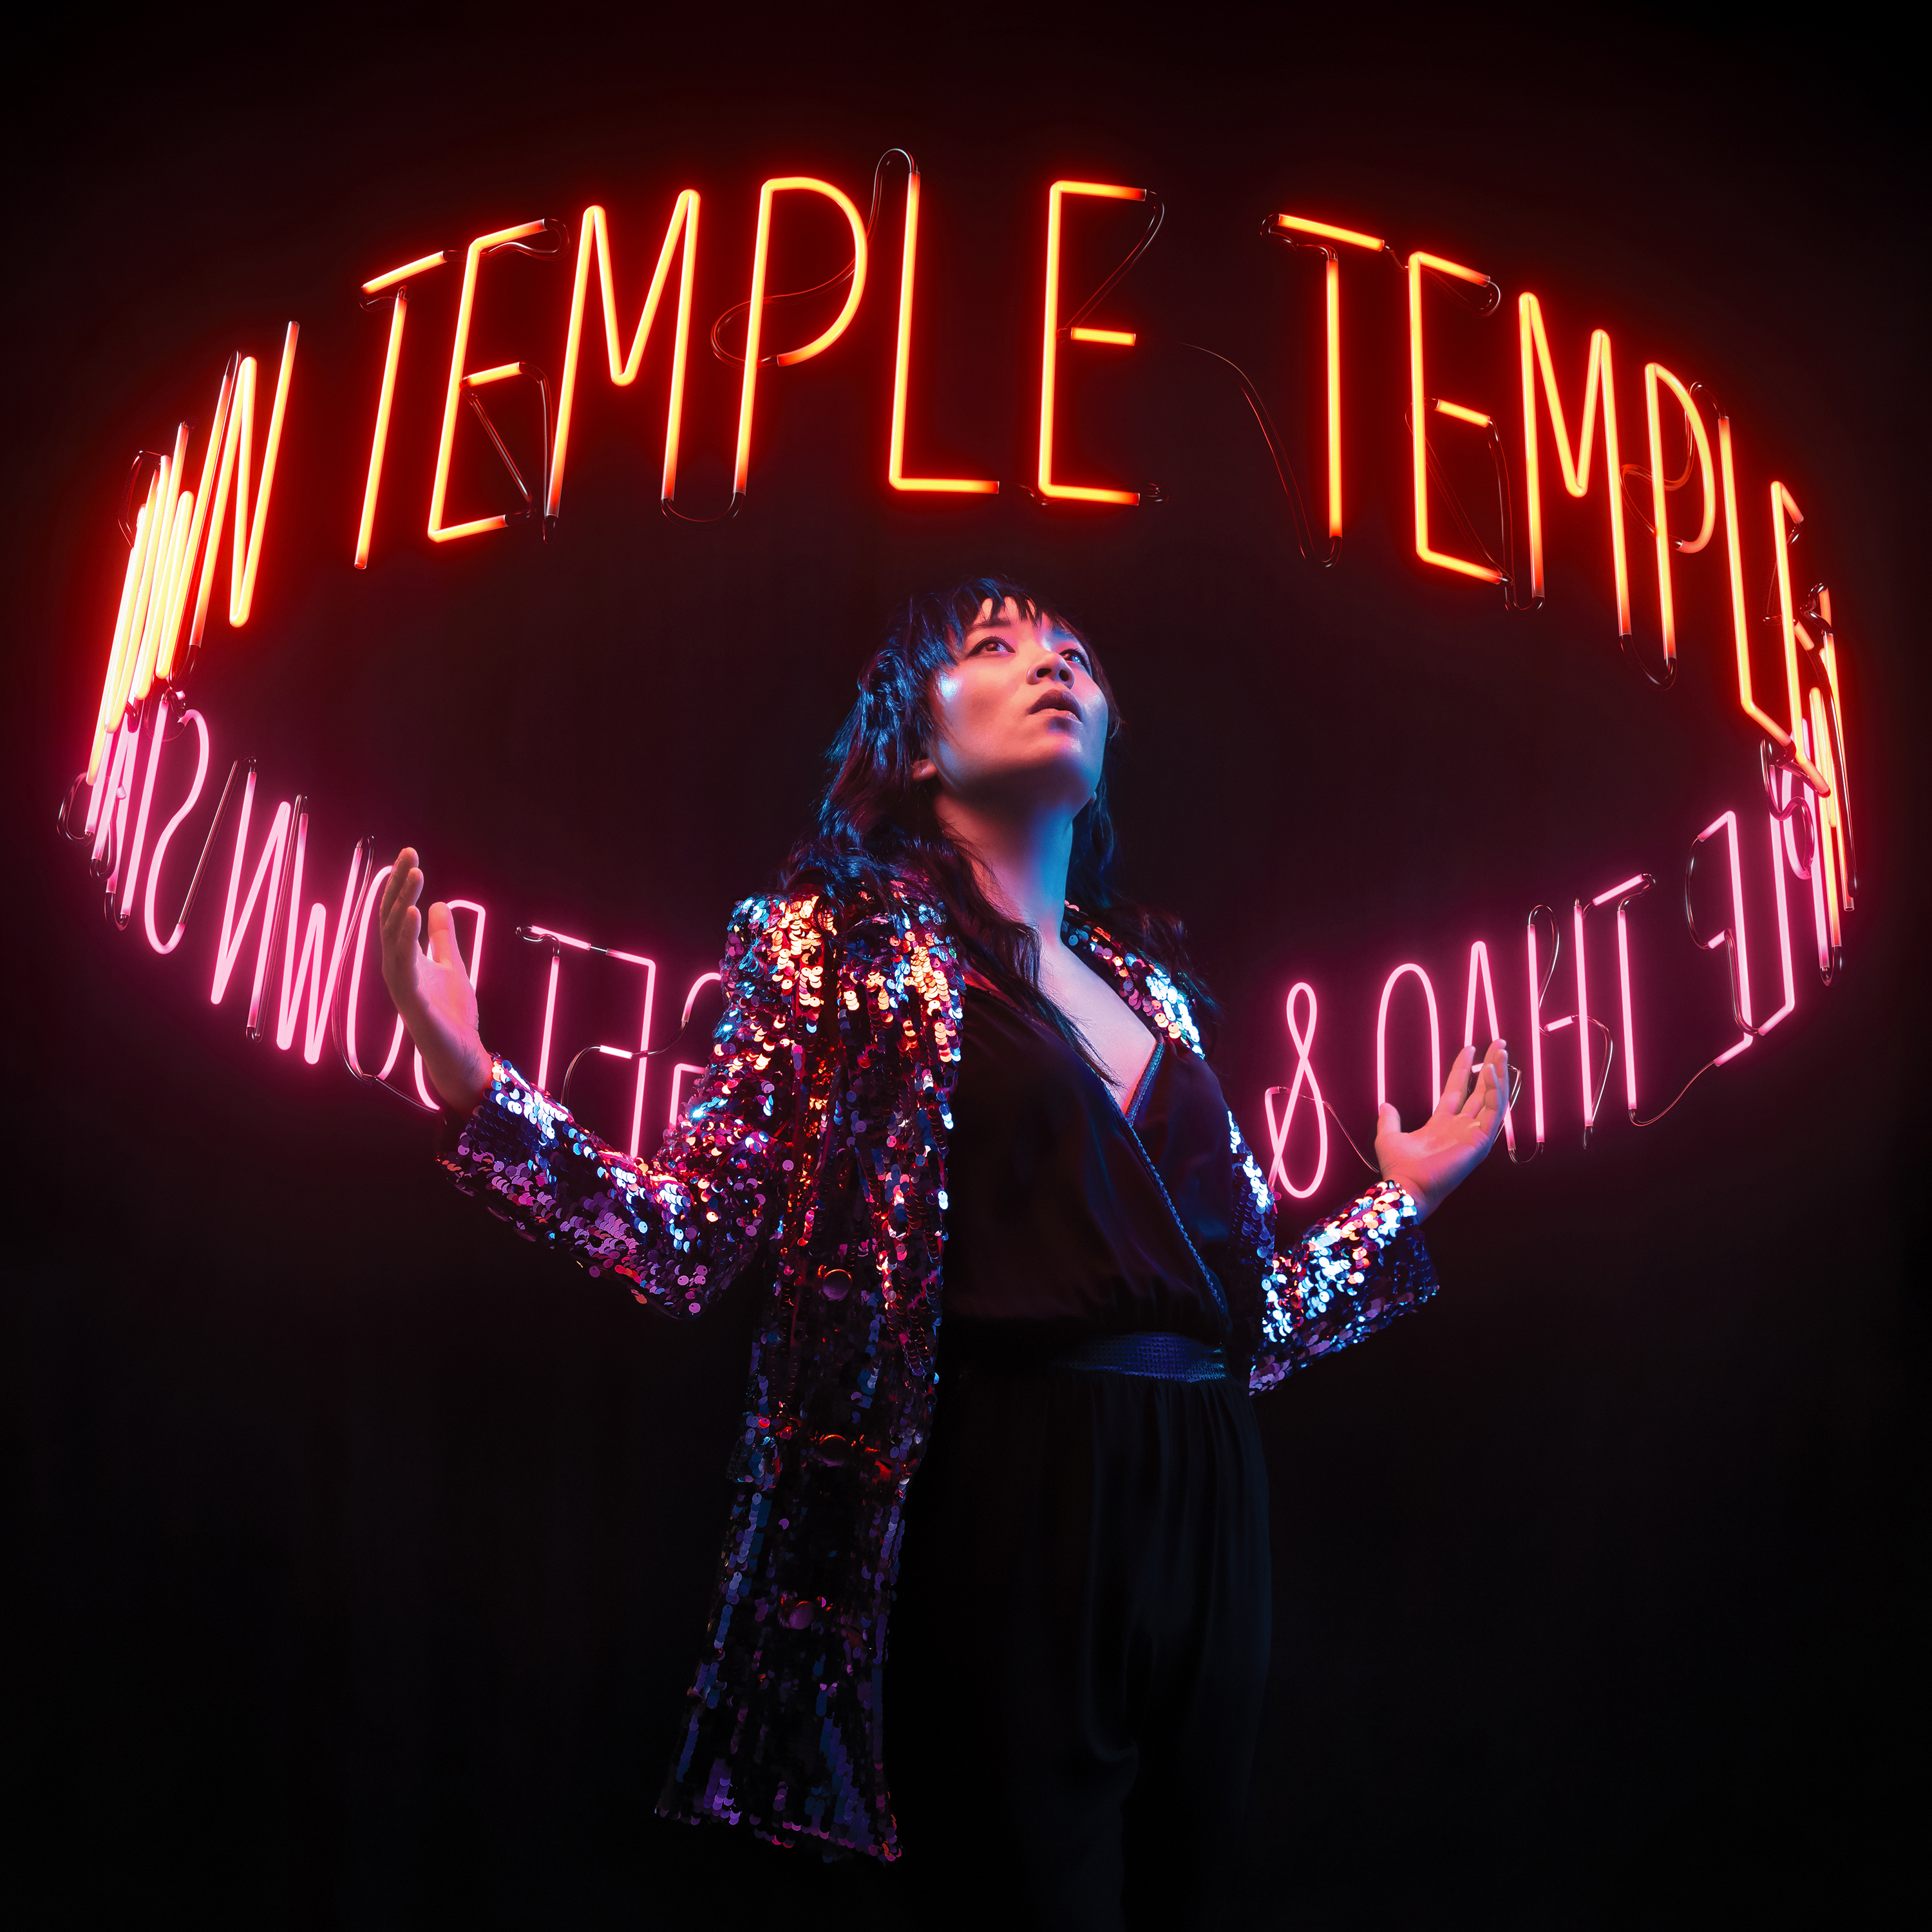 "Temple" by Thao & The Get Down Stay Down